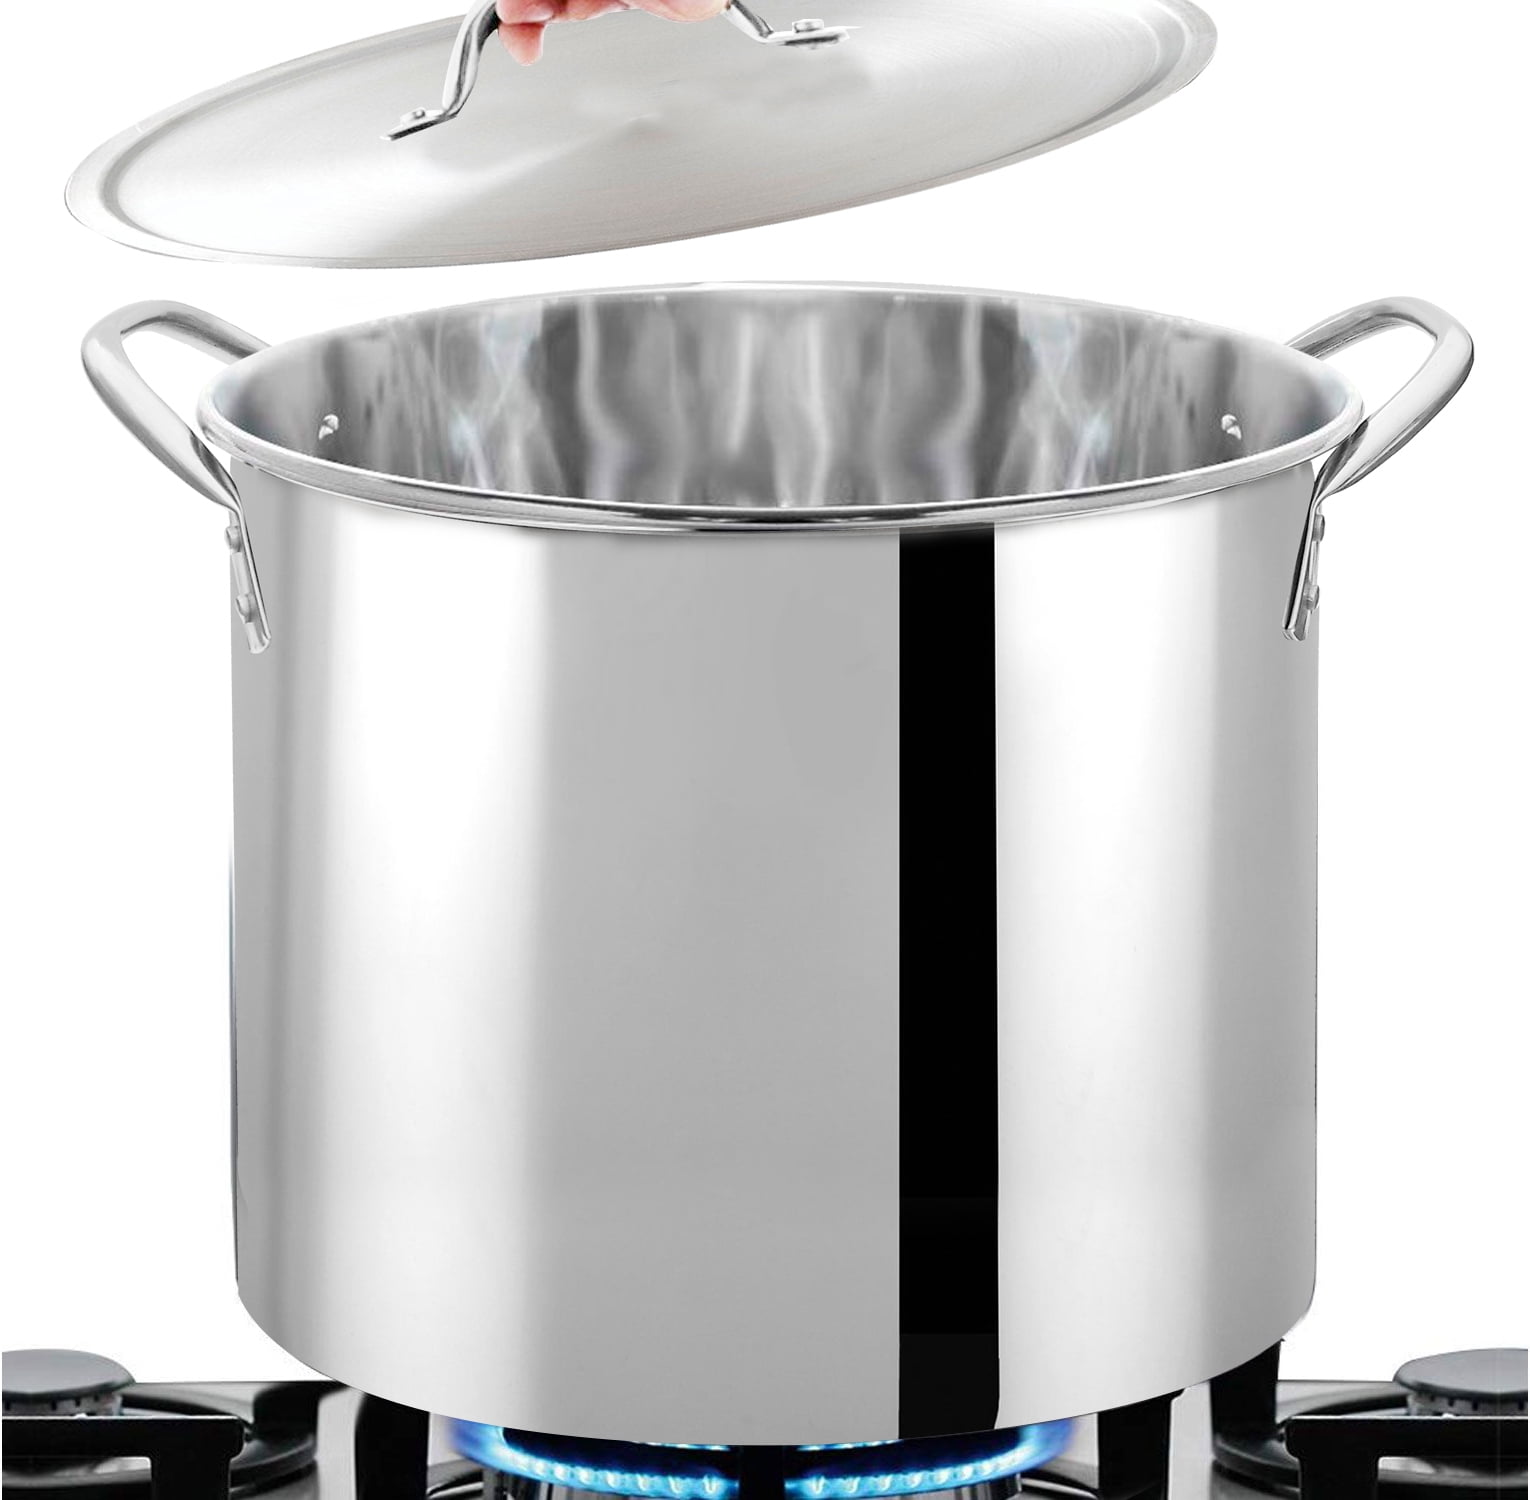 FRESHAIR™ 8 QT. STAINLESS STEEL STOCK POT, TIME-AND-ENERGY SAVING